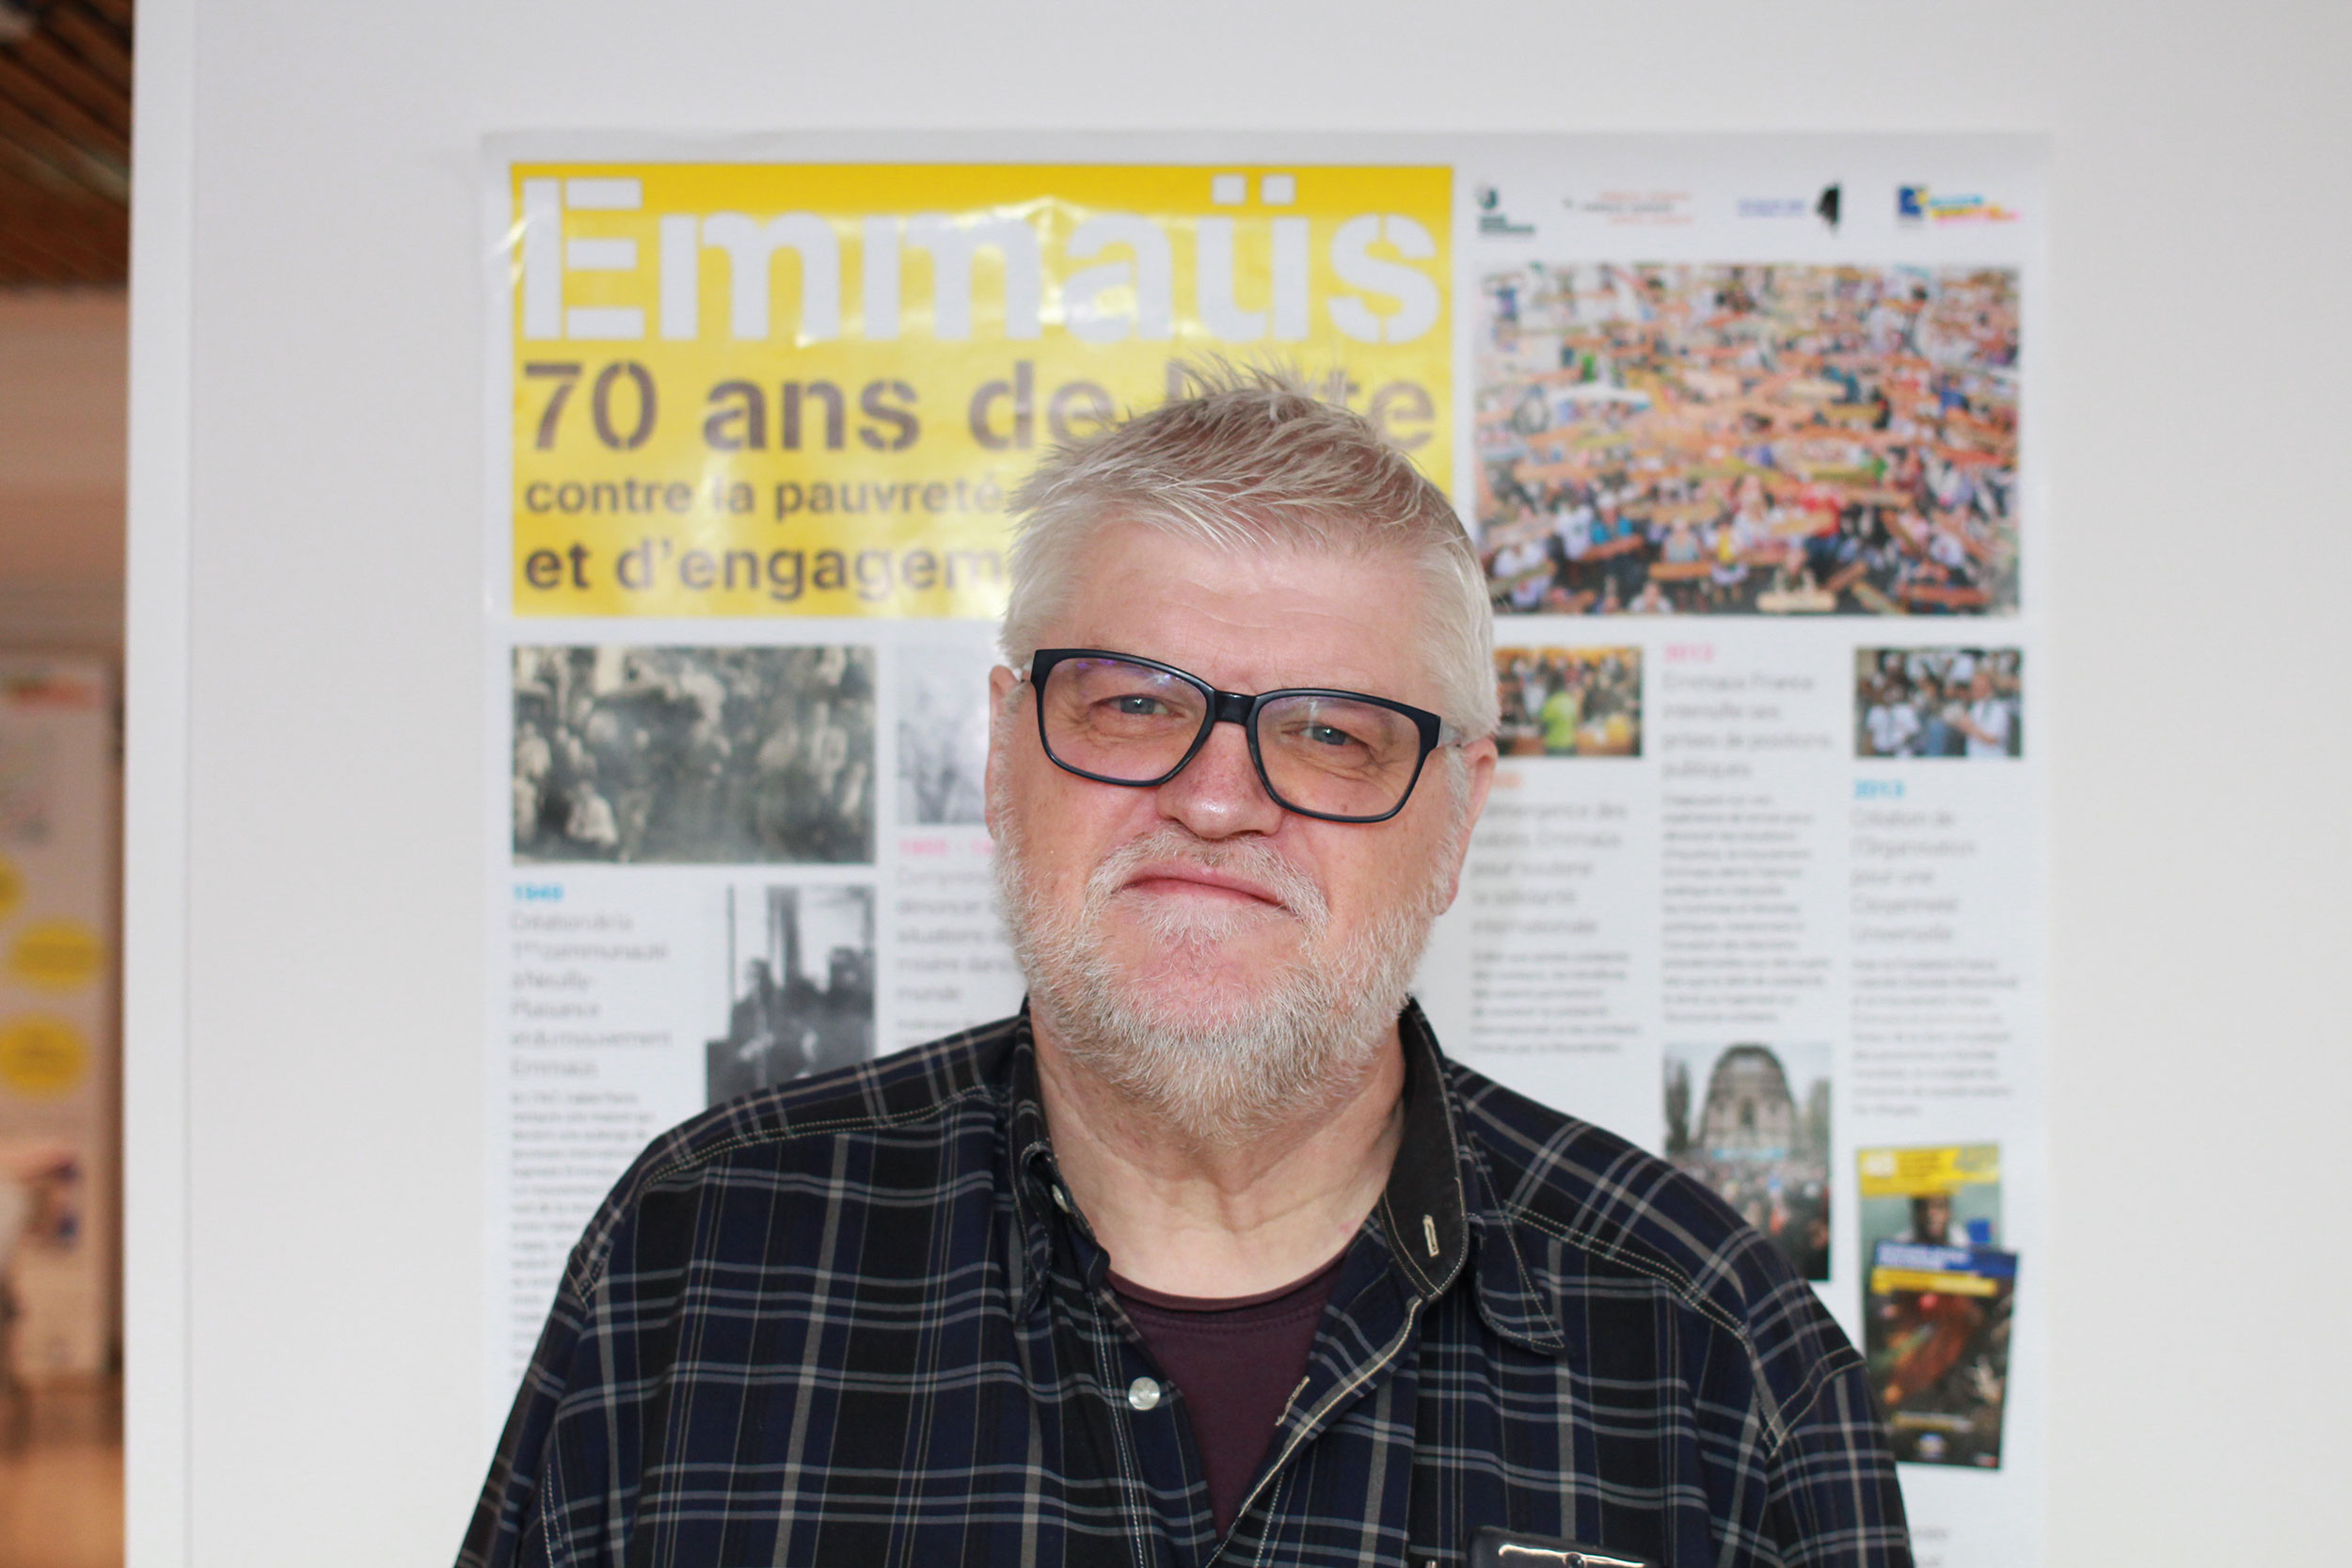 Situation in Emmaus communities in the North of France: Question time with Antoine Sueur, Chair of Emmaus France